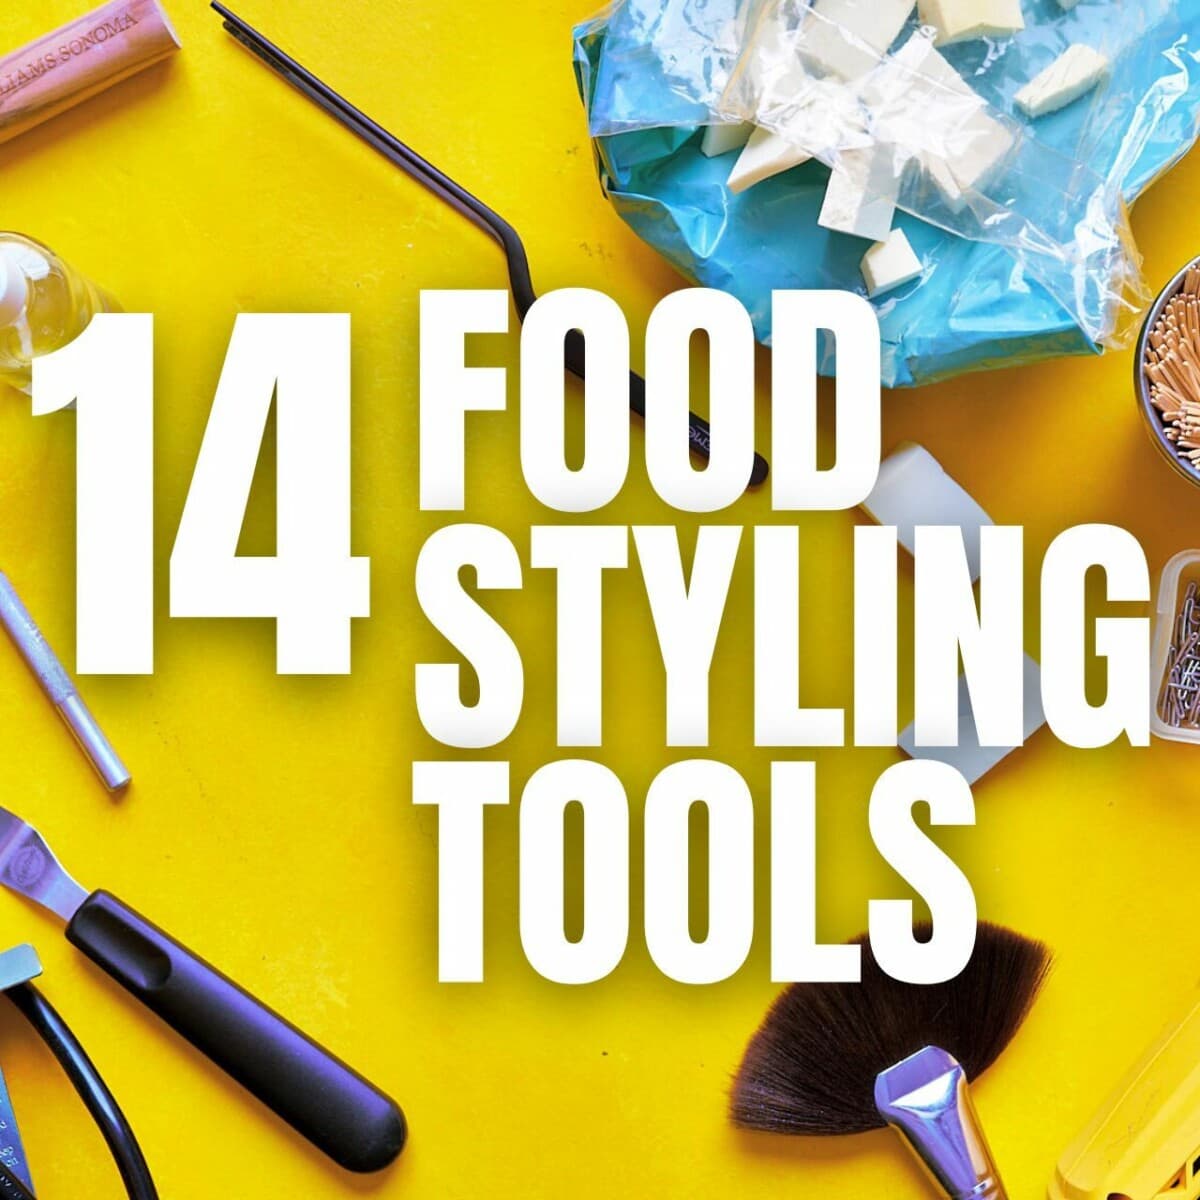 14 Favorite Food Styling Tools